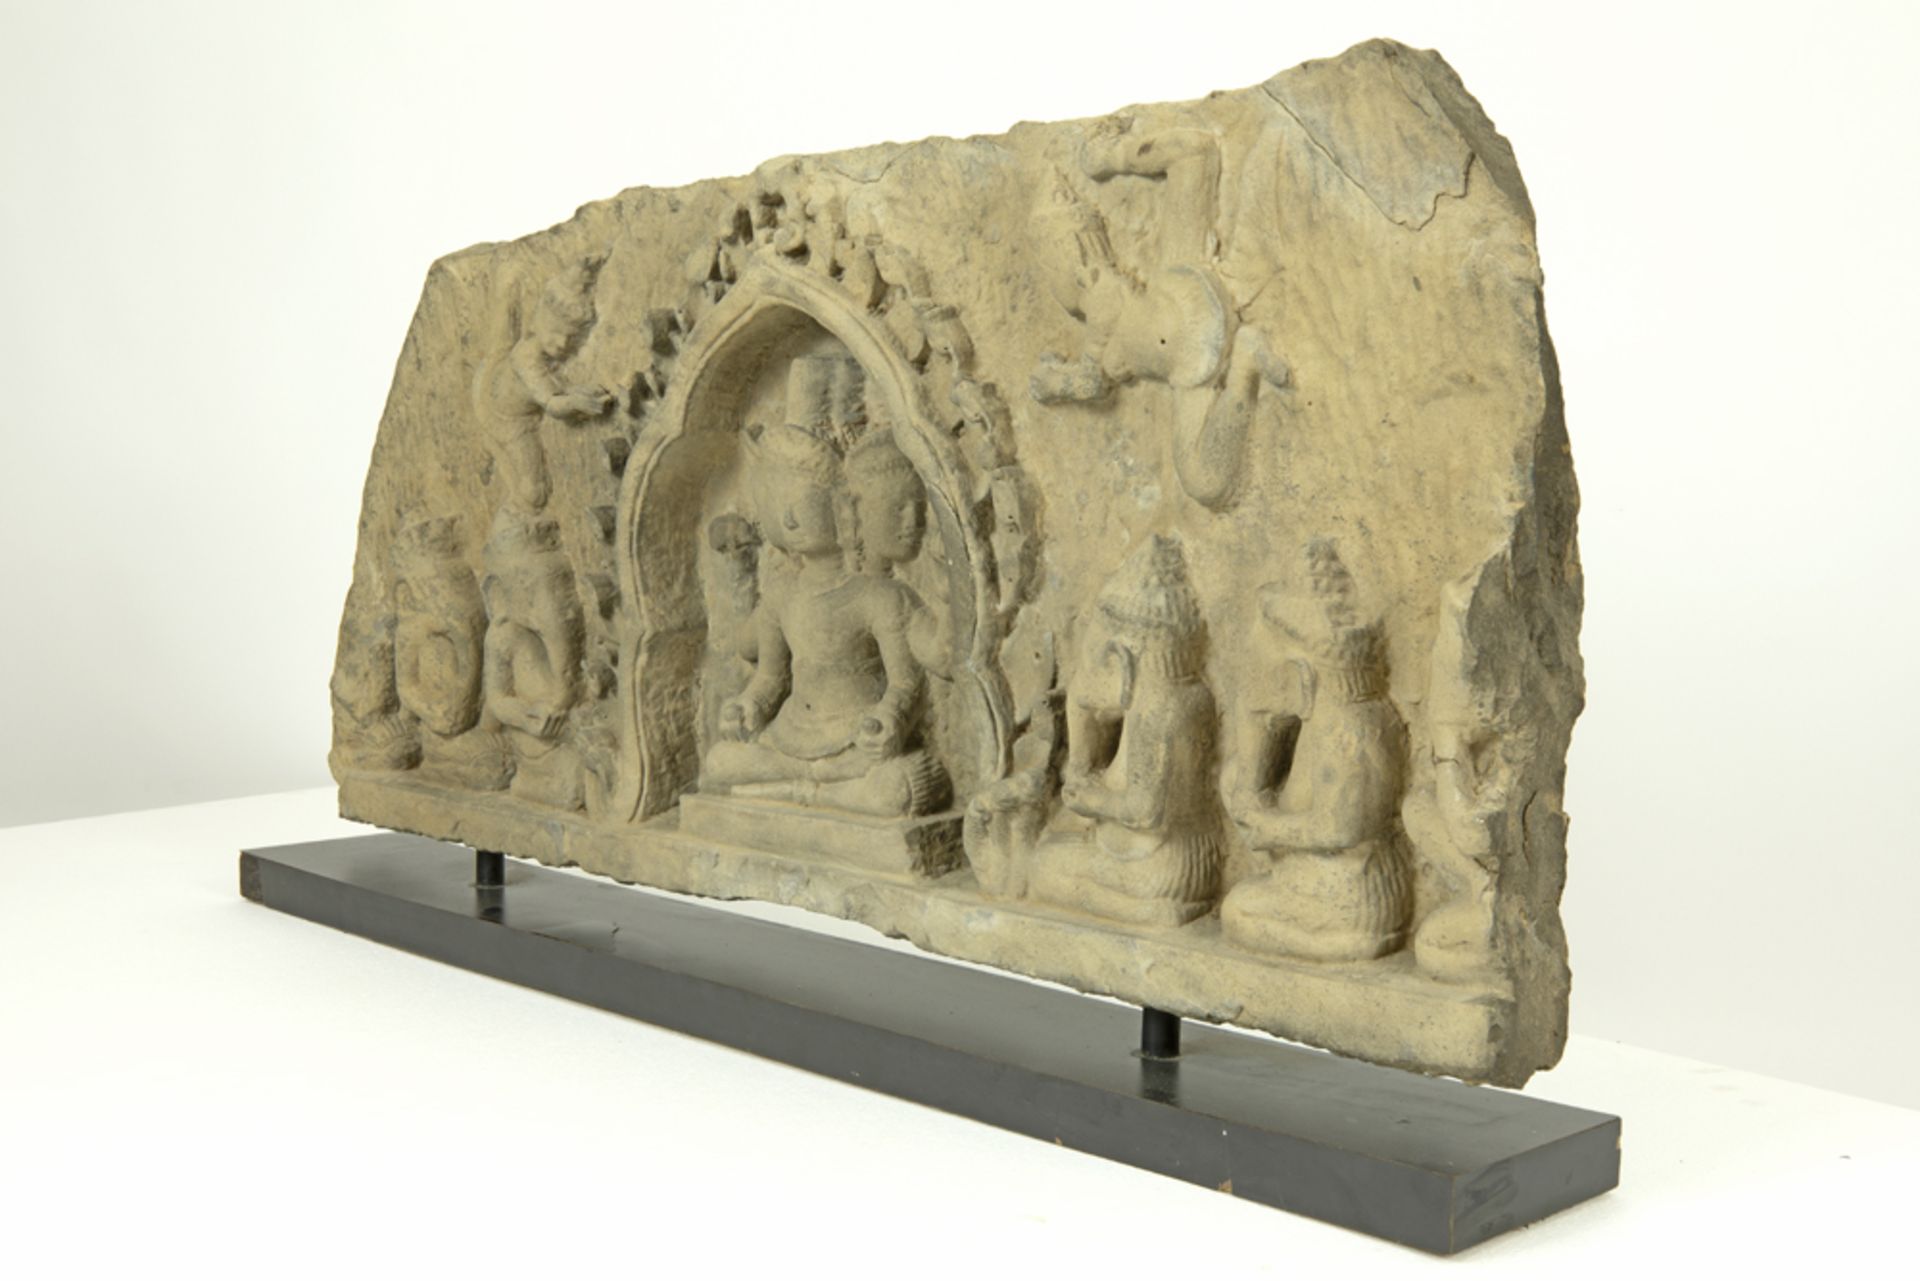 10th/12th Cent. Cambodian Khmer stone lintel with the depecition of the "Creation" with in the - Image 2 of 4